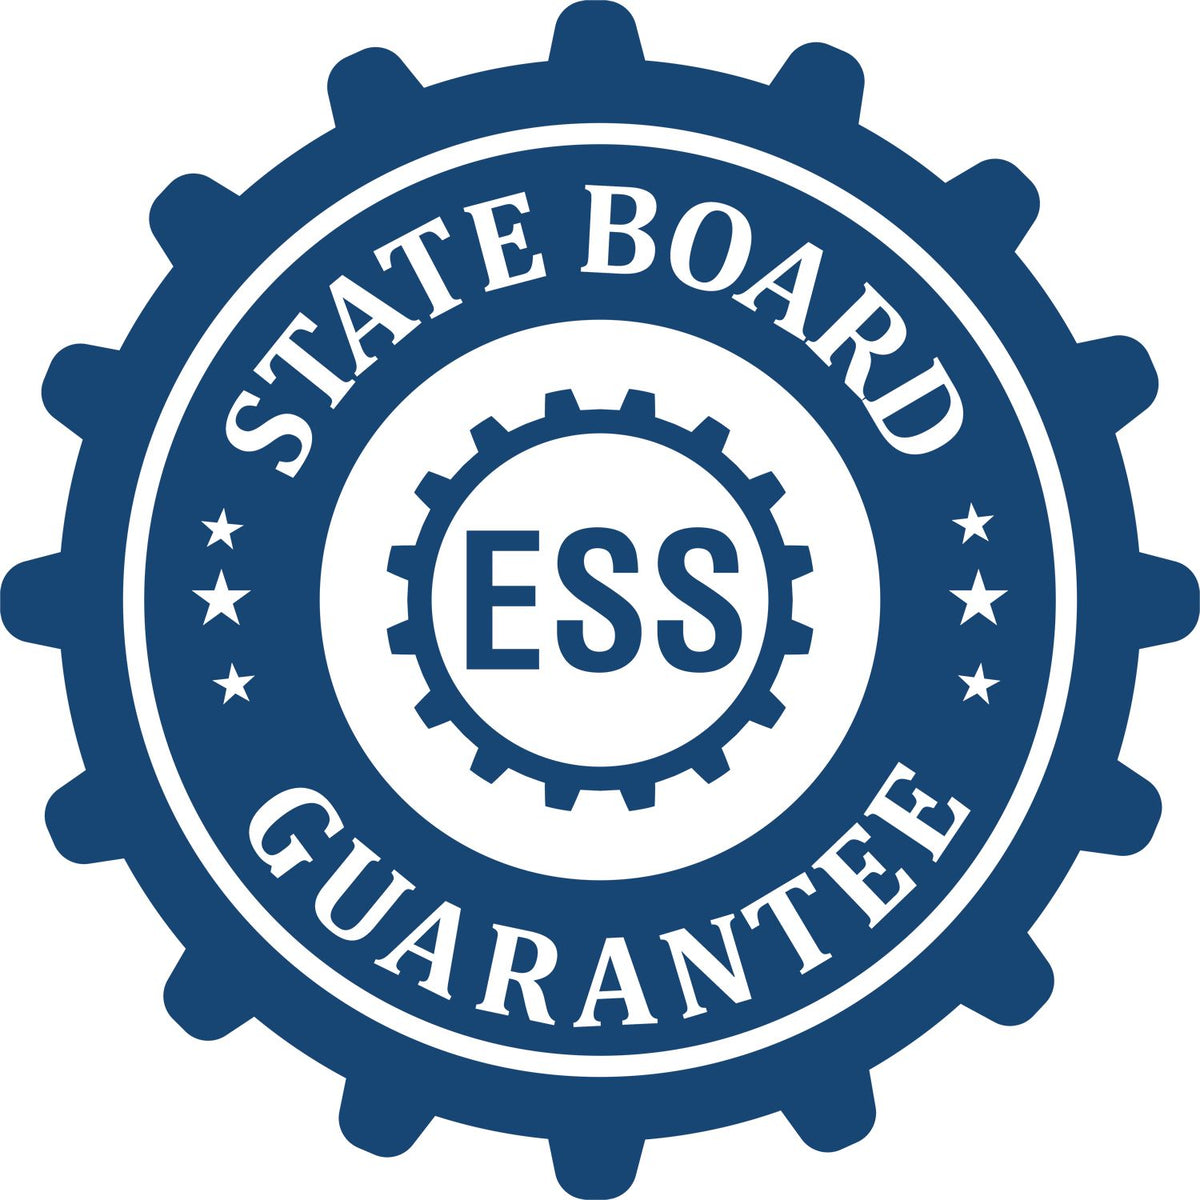 An emblem in a gear shape illustrating a state board guarantee for the Wooden Handle Maine State Seal Notary Public Stamp product.